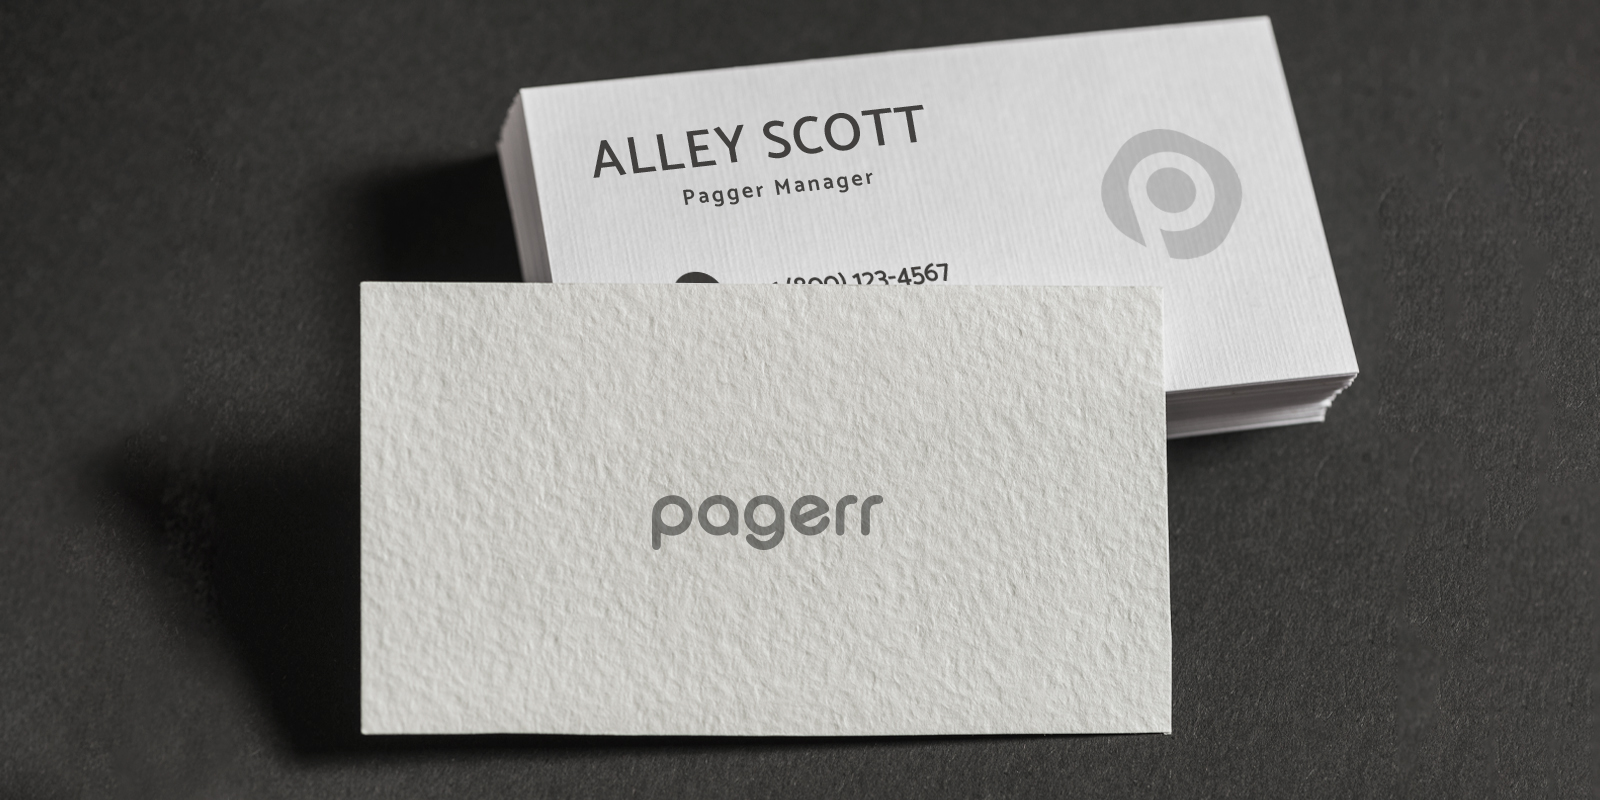 Special material business cards in Hobart - Print with Pagerr